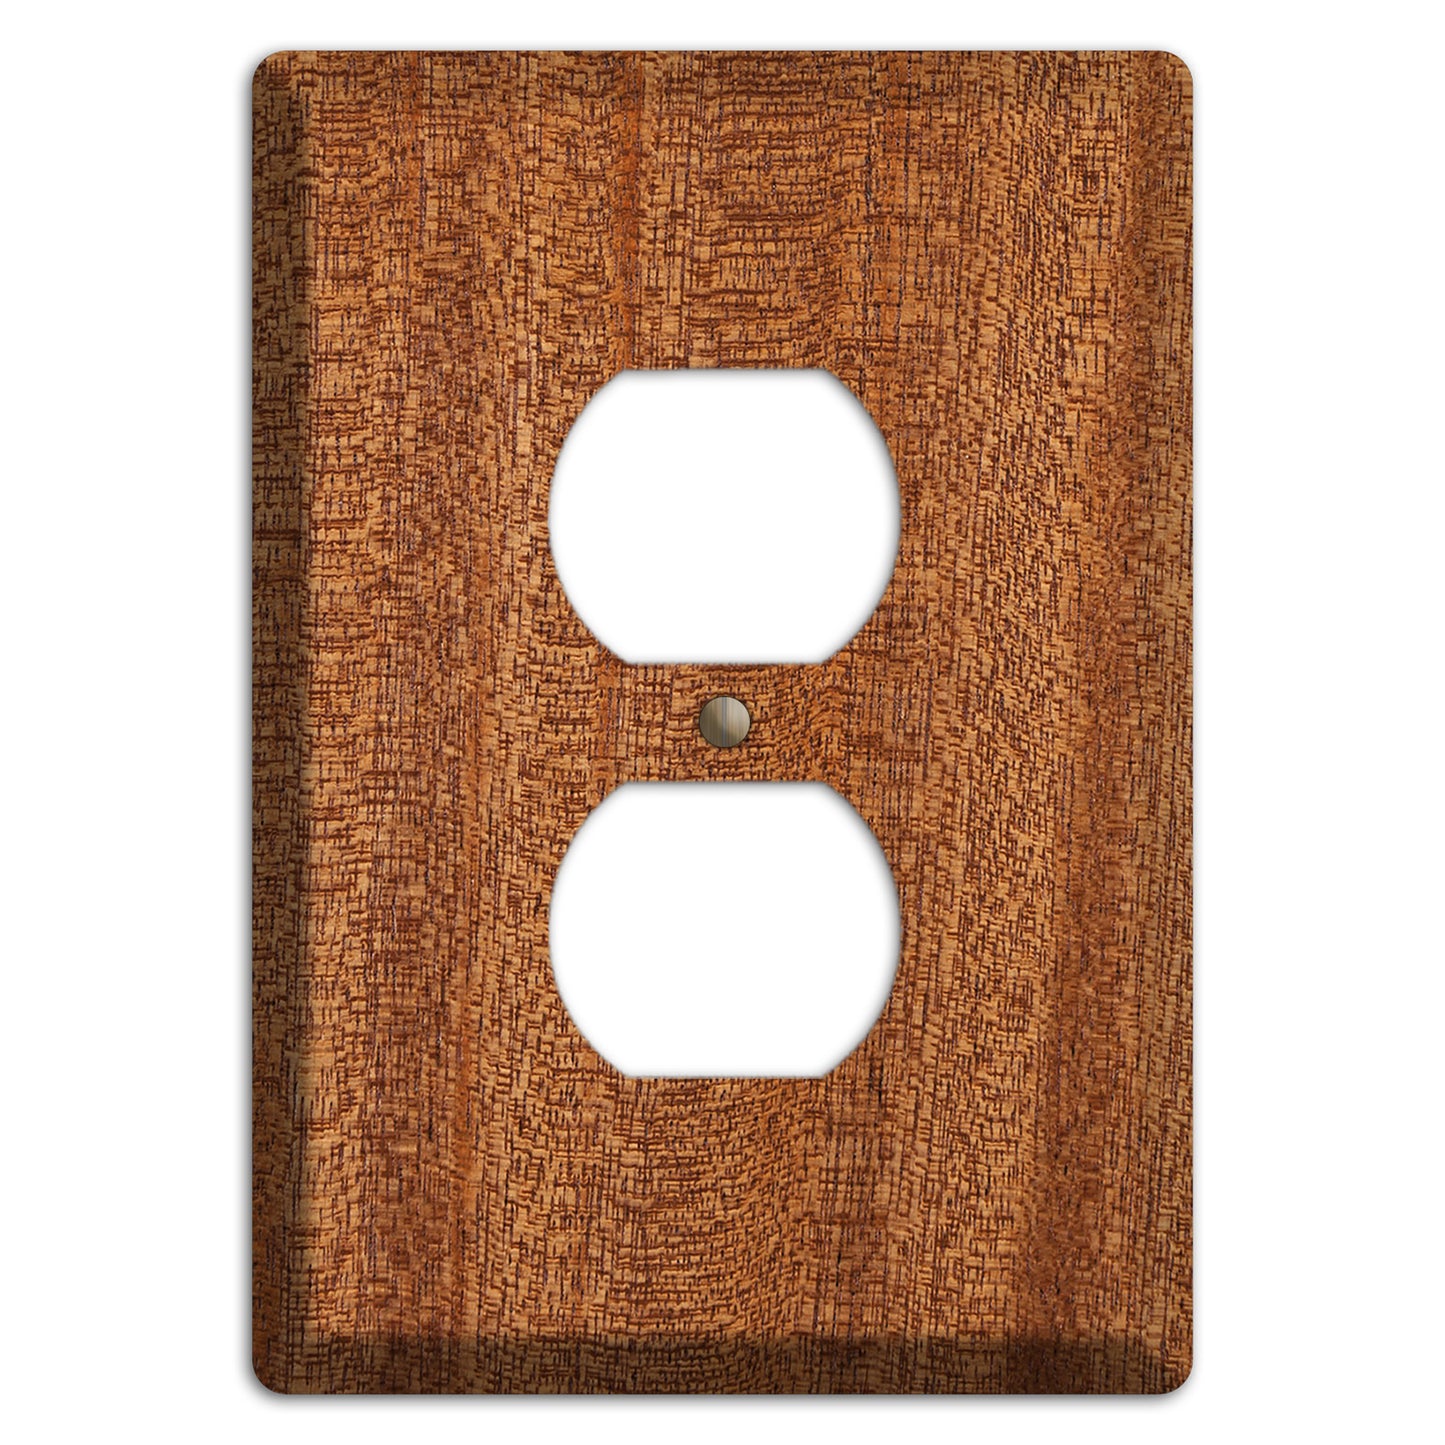 Mahogany Wood Duplex Outlet Cover Plate